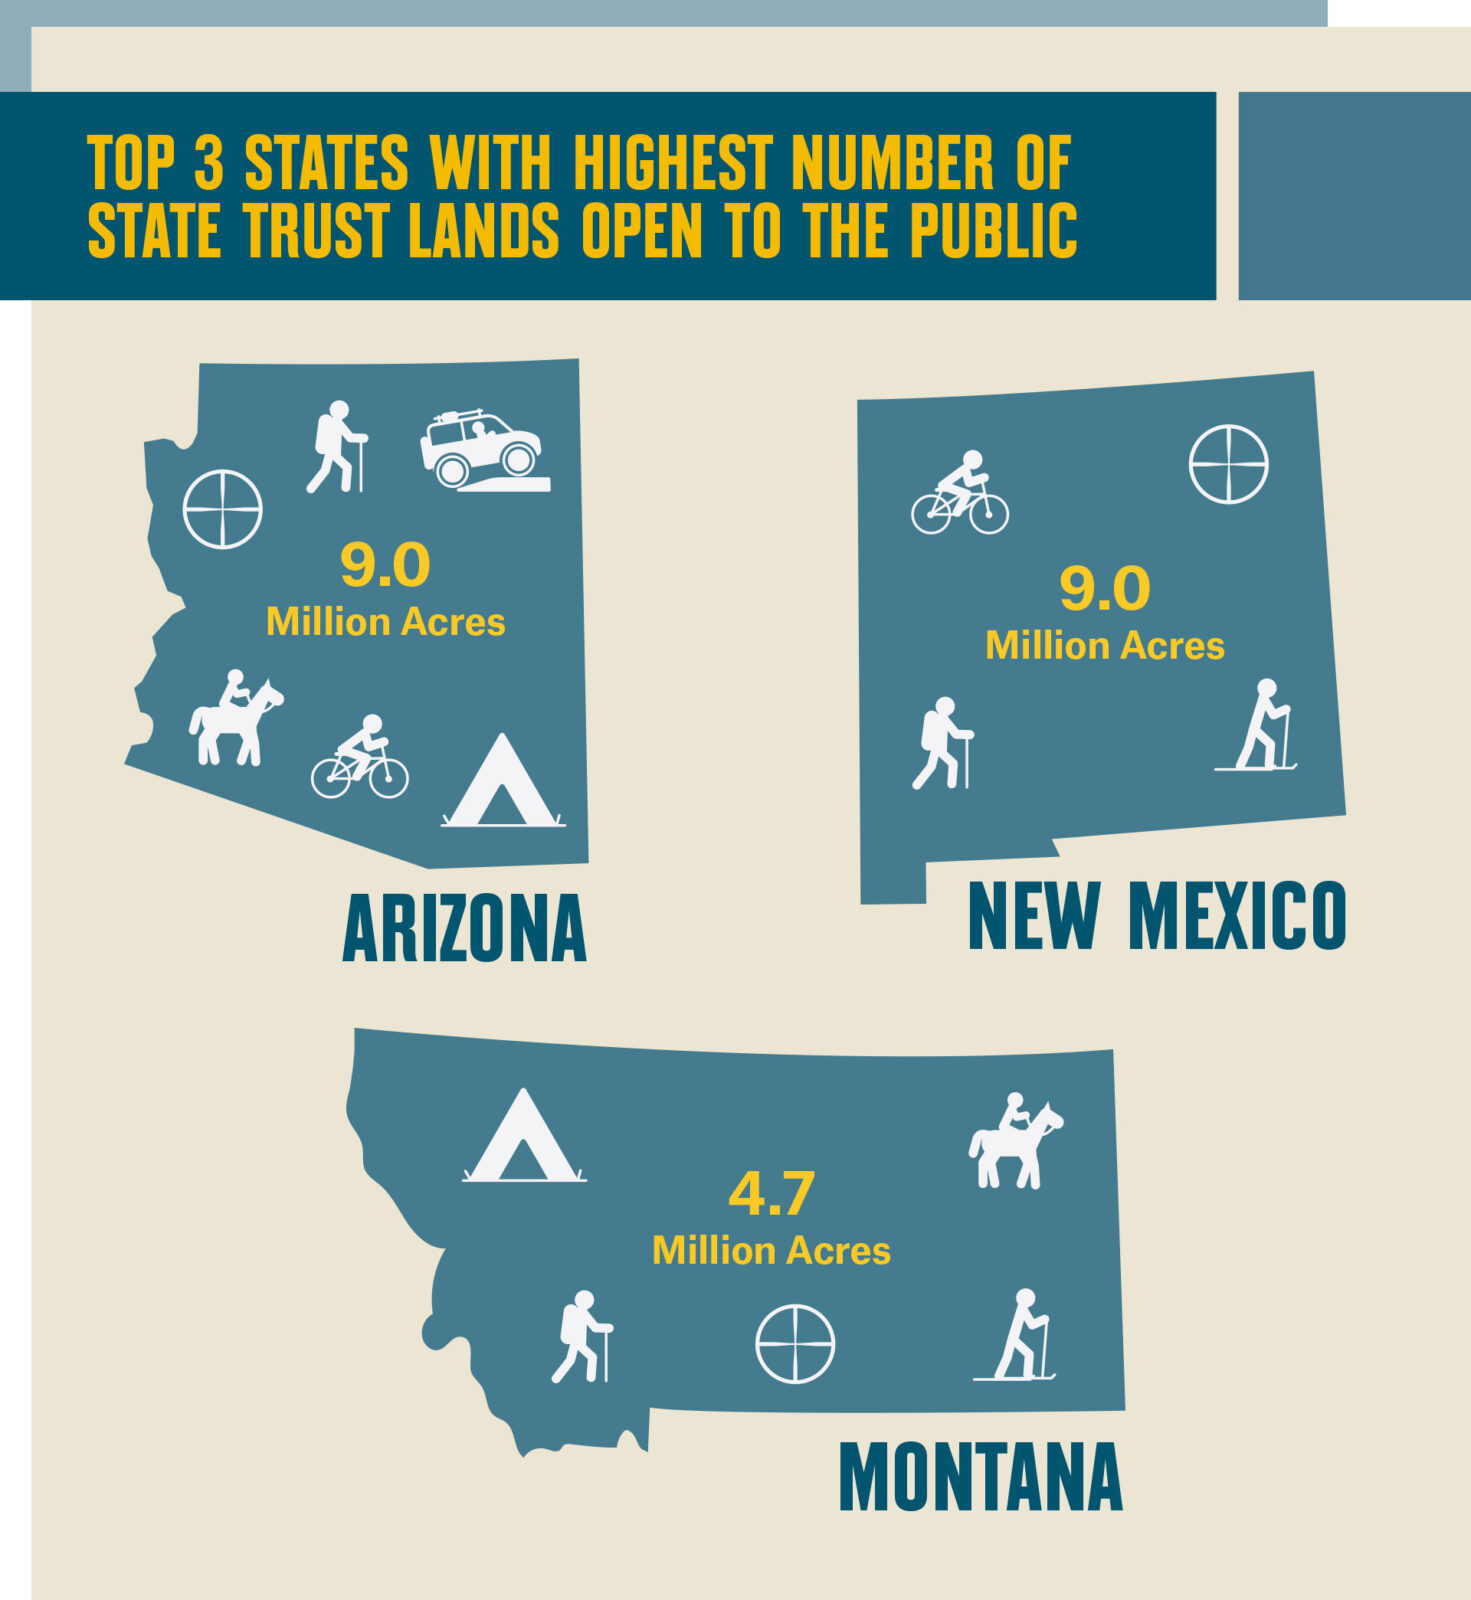 Graphic depicting Arizona, New Mexico and Montana as the Top 3 States with the Most Publicly Accessible State Trust Lands.